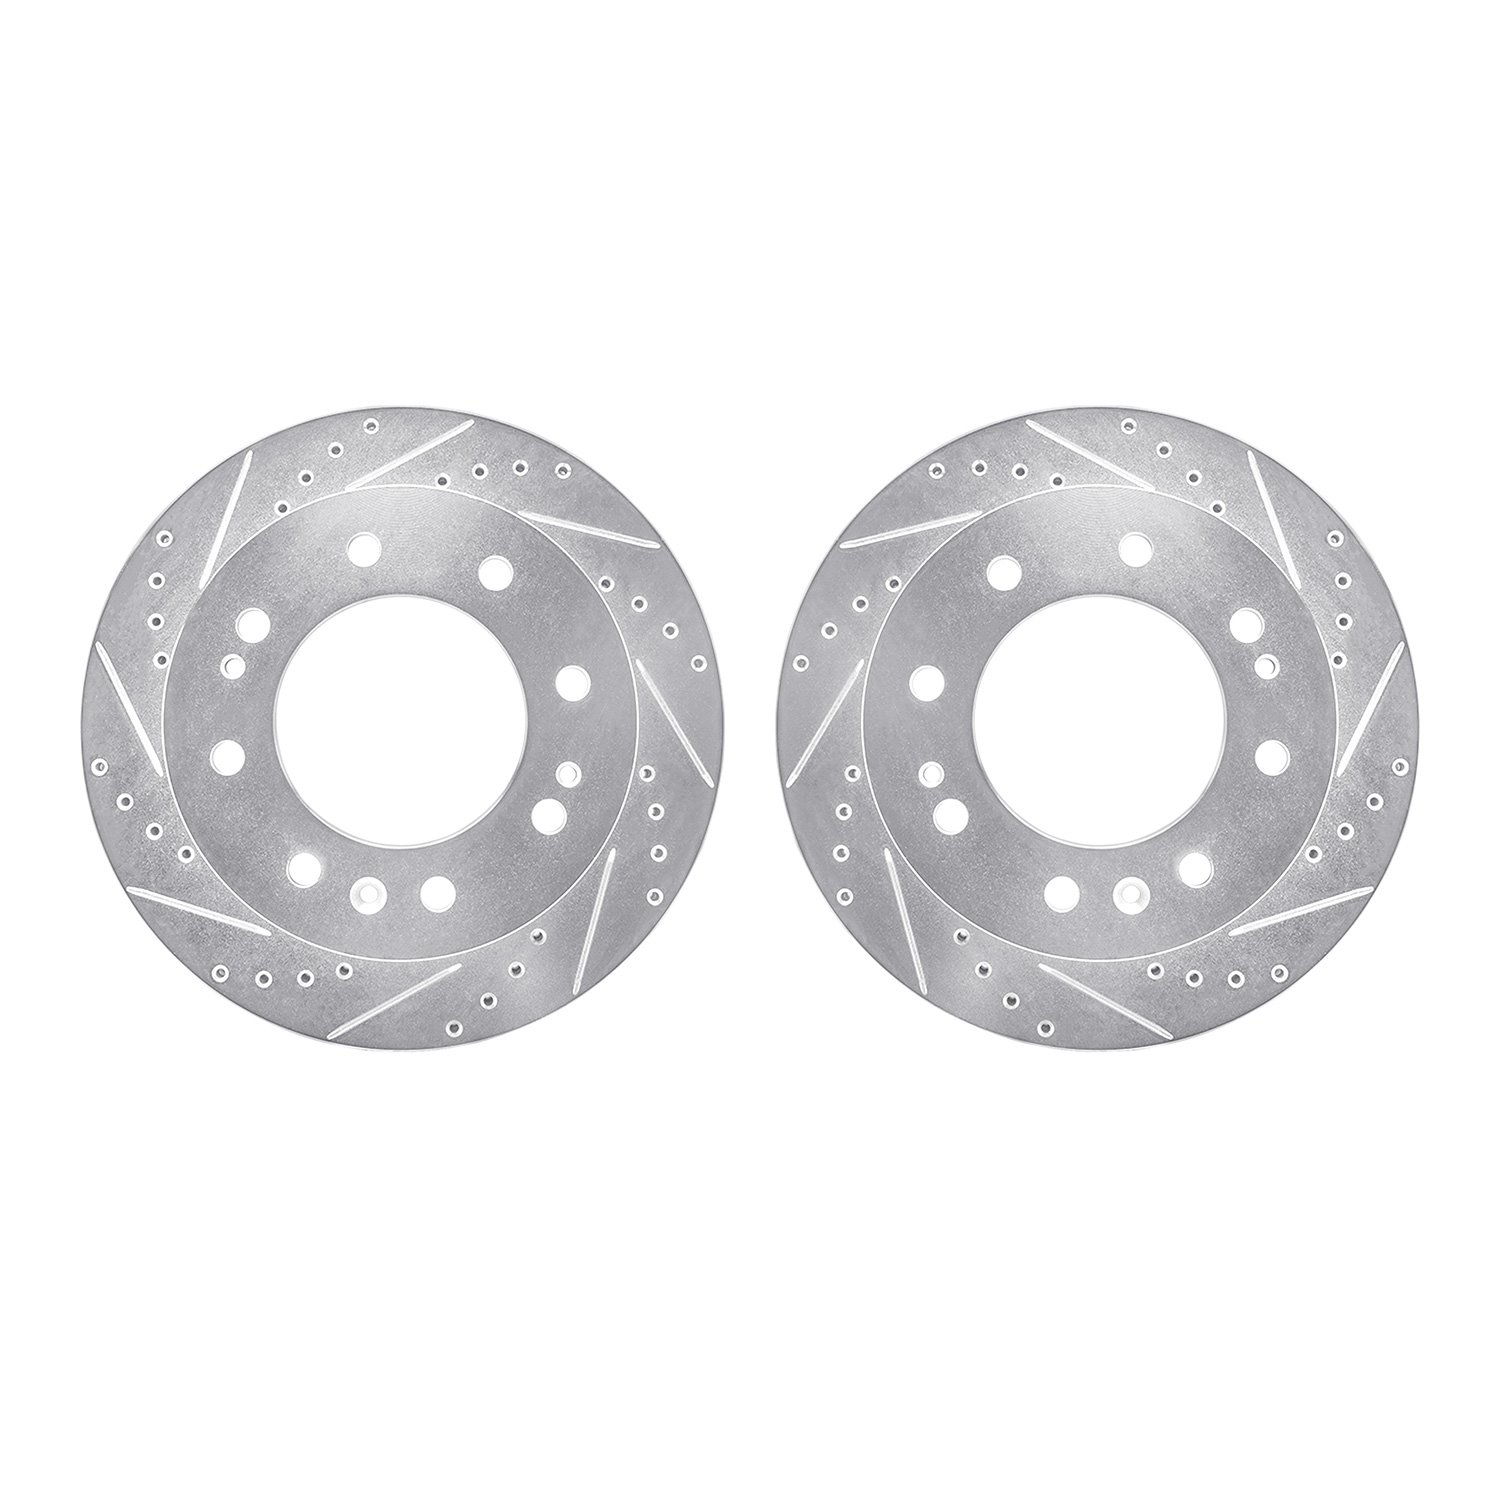 Drilled/Slotted Brake Rotors [Silver], Fits Select GM